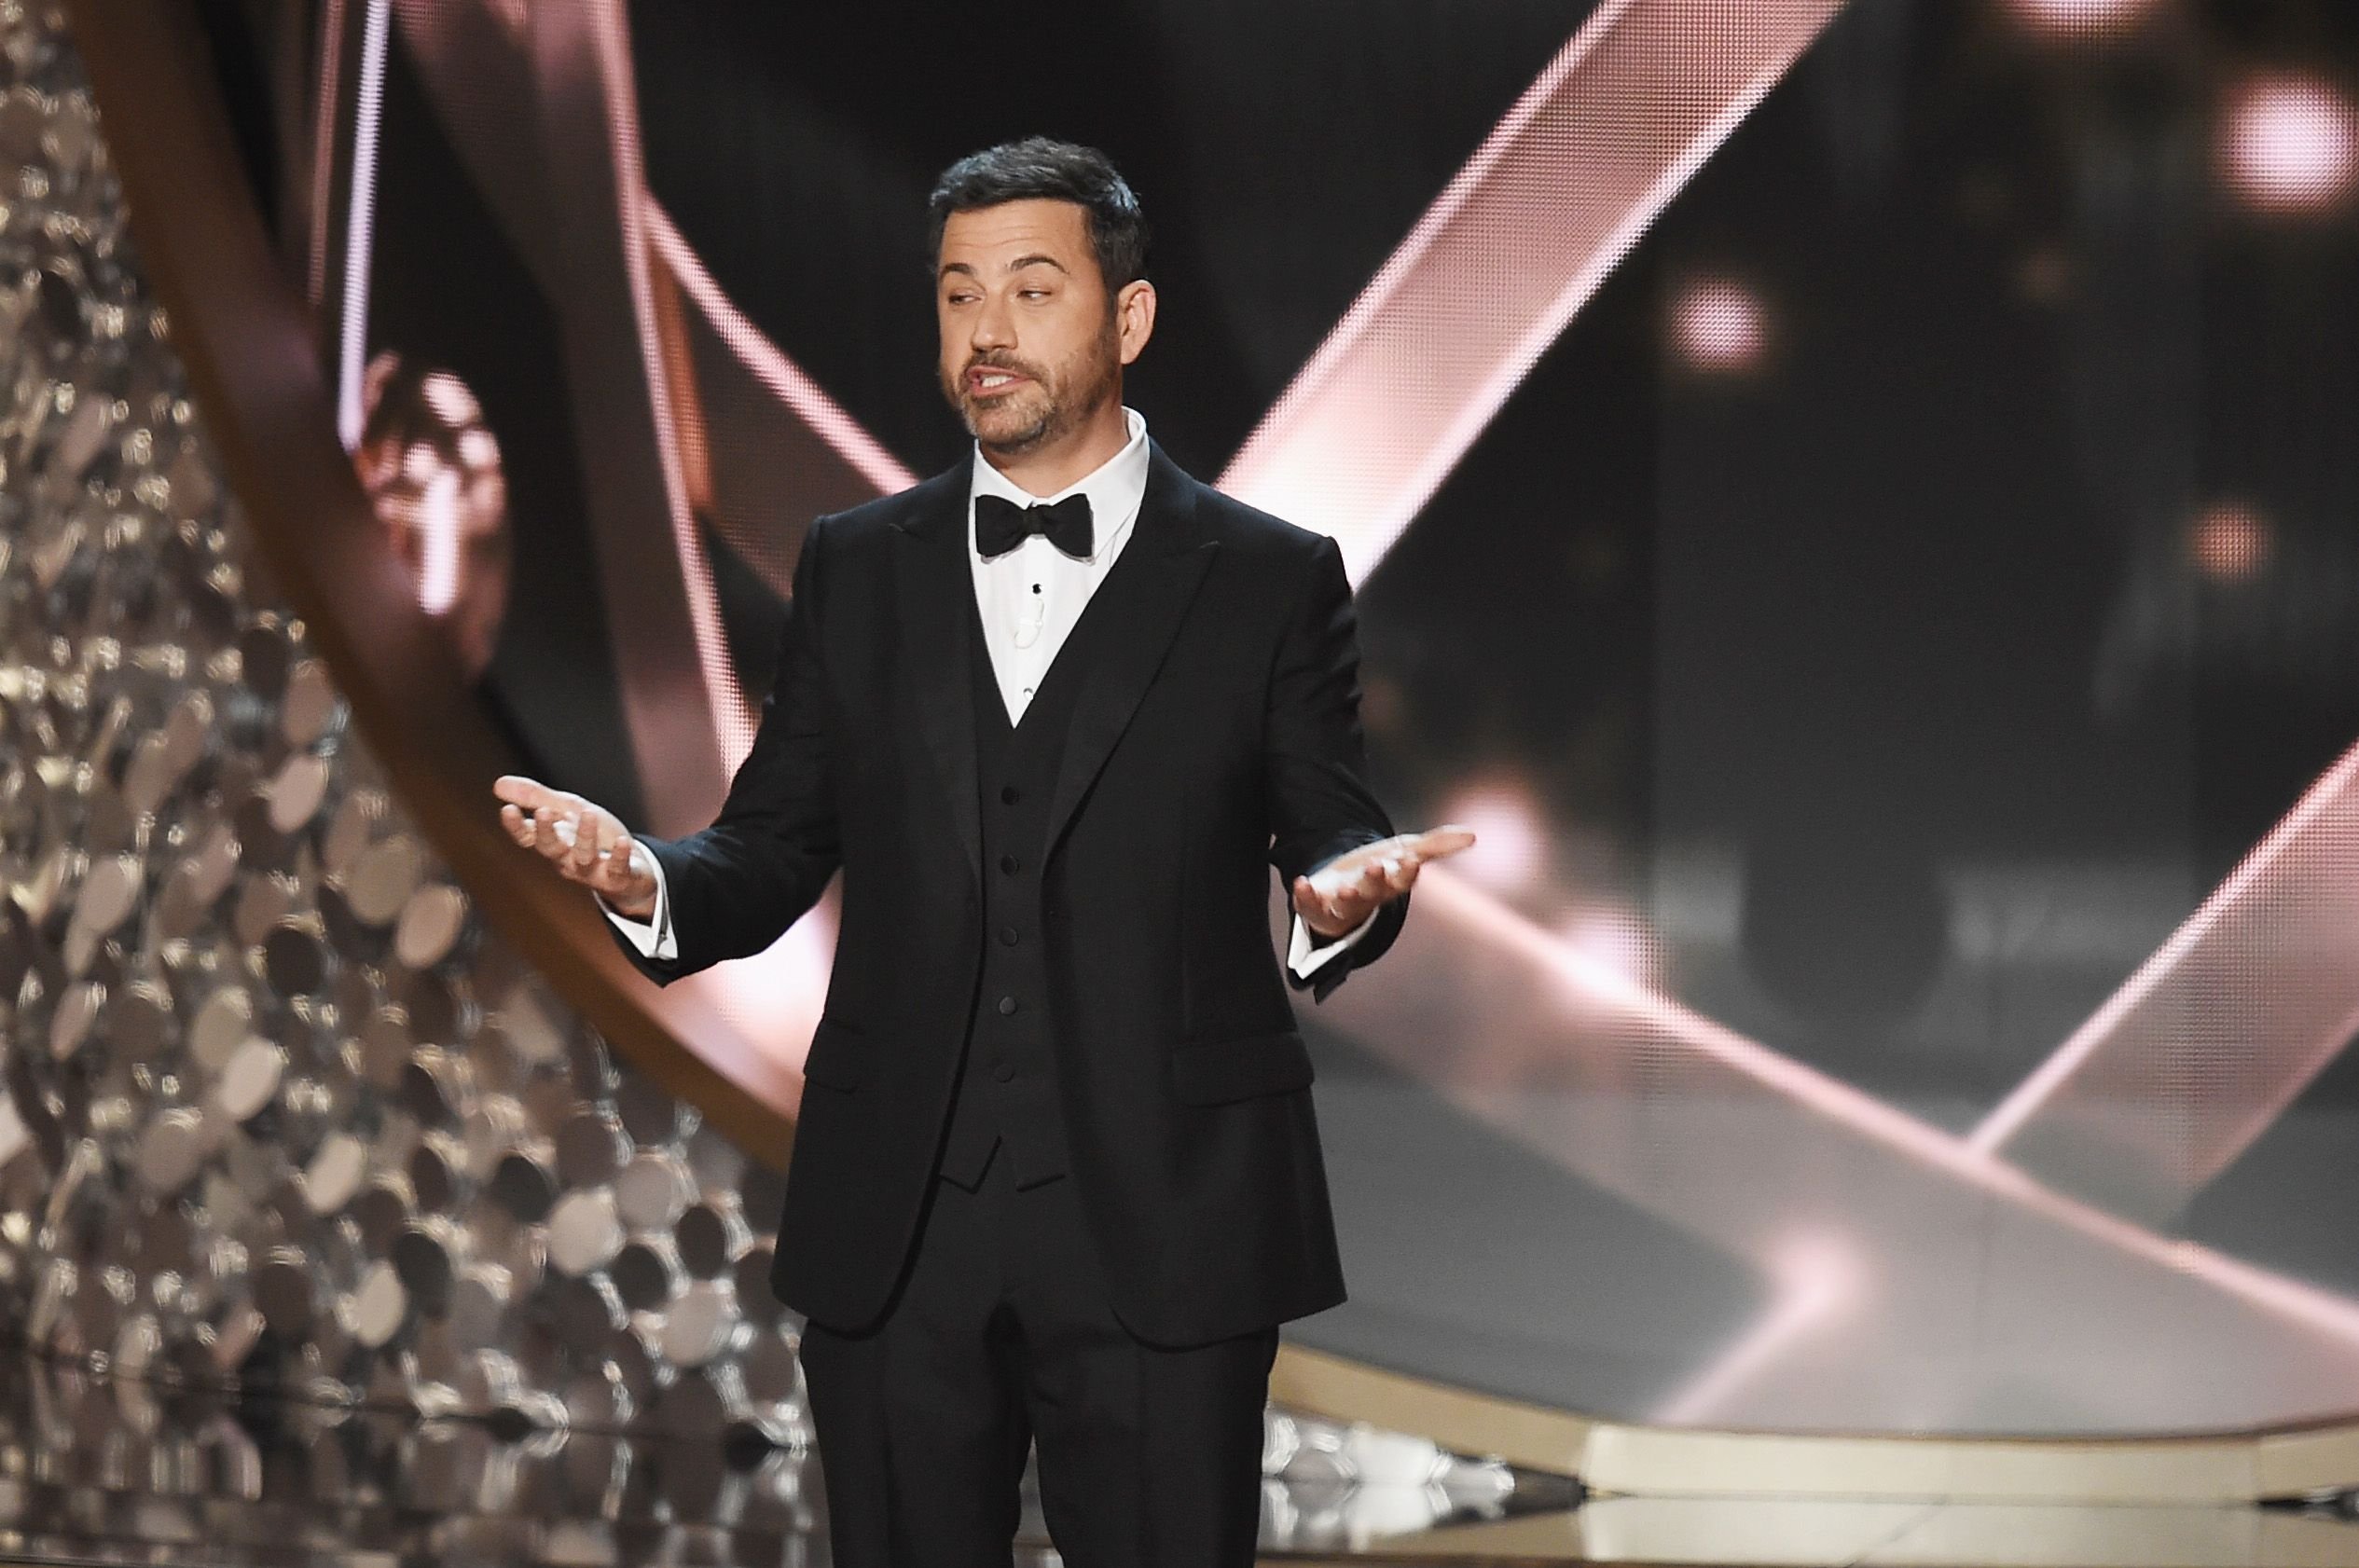 Jimmy Kimmel onstage at the 68th Annual Primetime Emmy Awards at Microsoft Theater on September 18, 2016 in Los Angeles, California. | Source: Getty Images